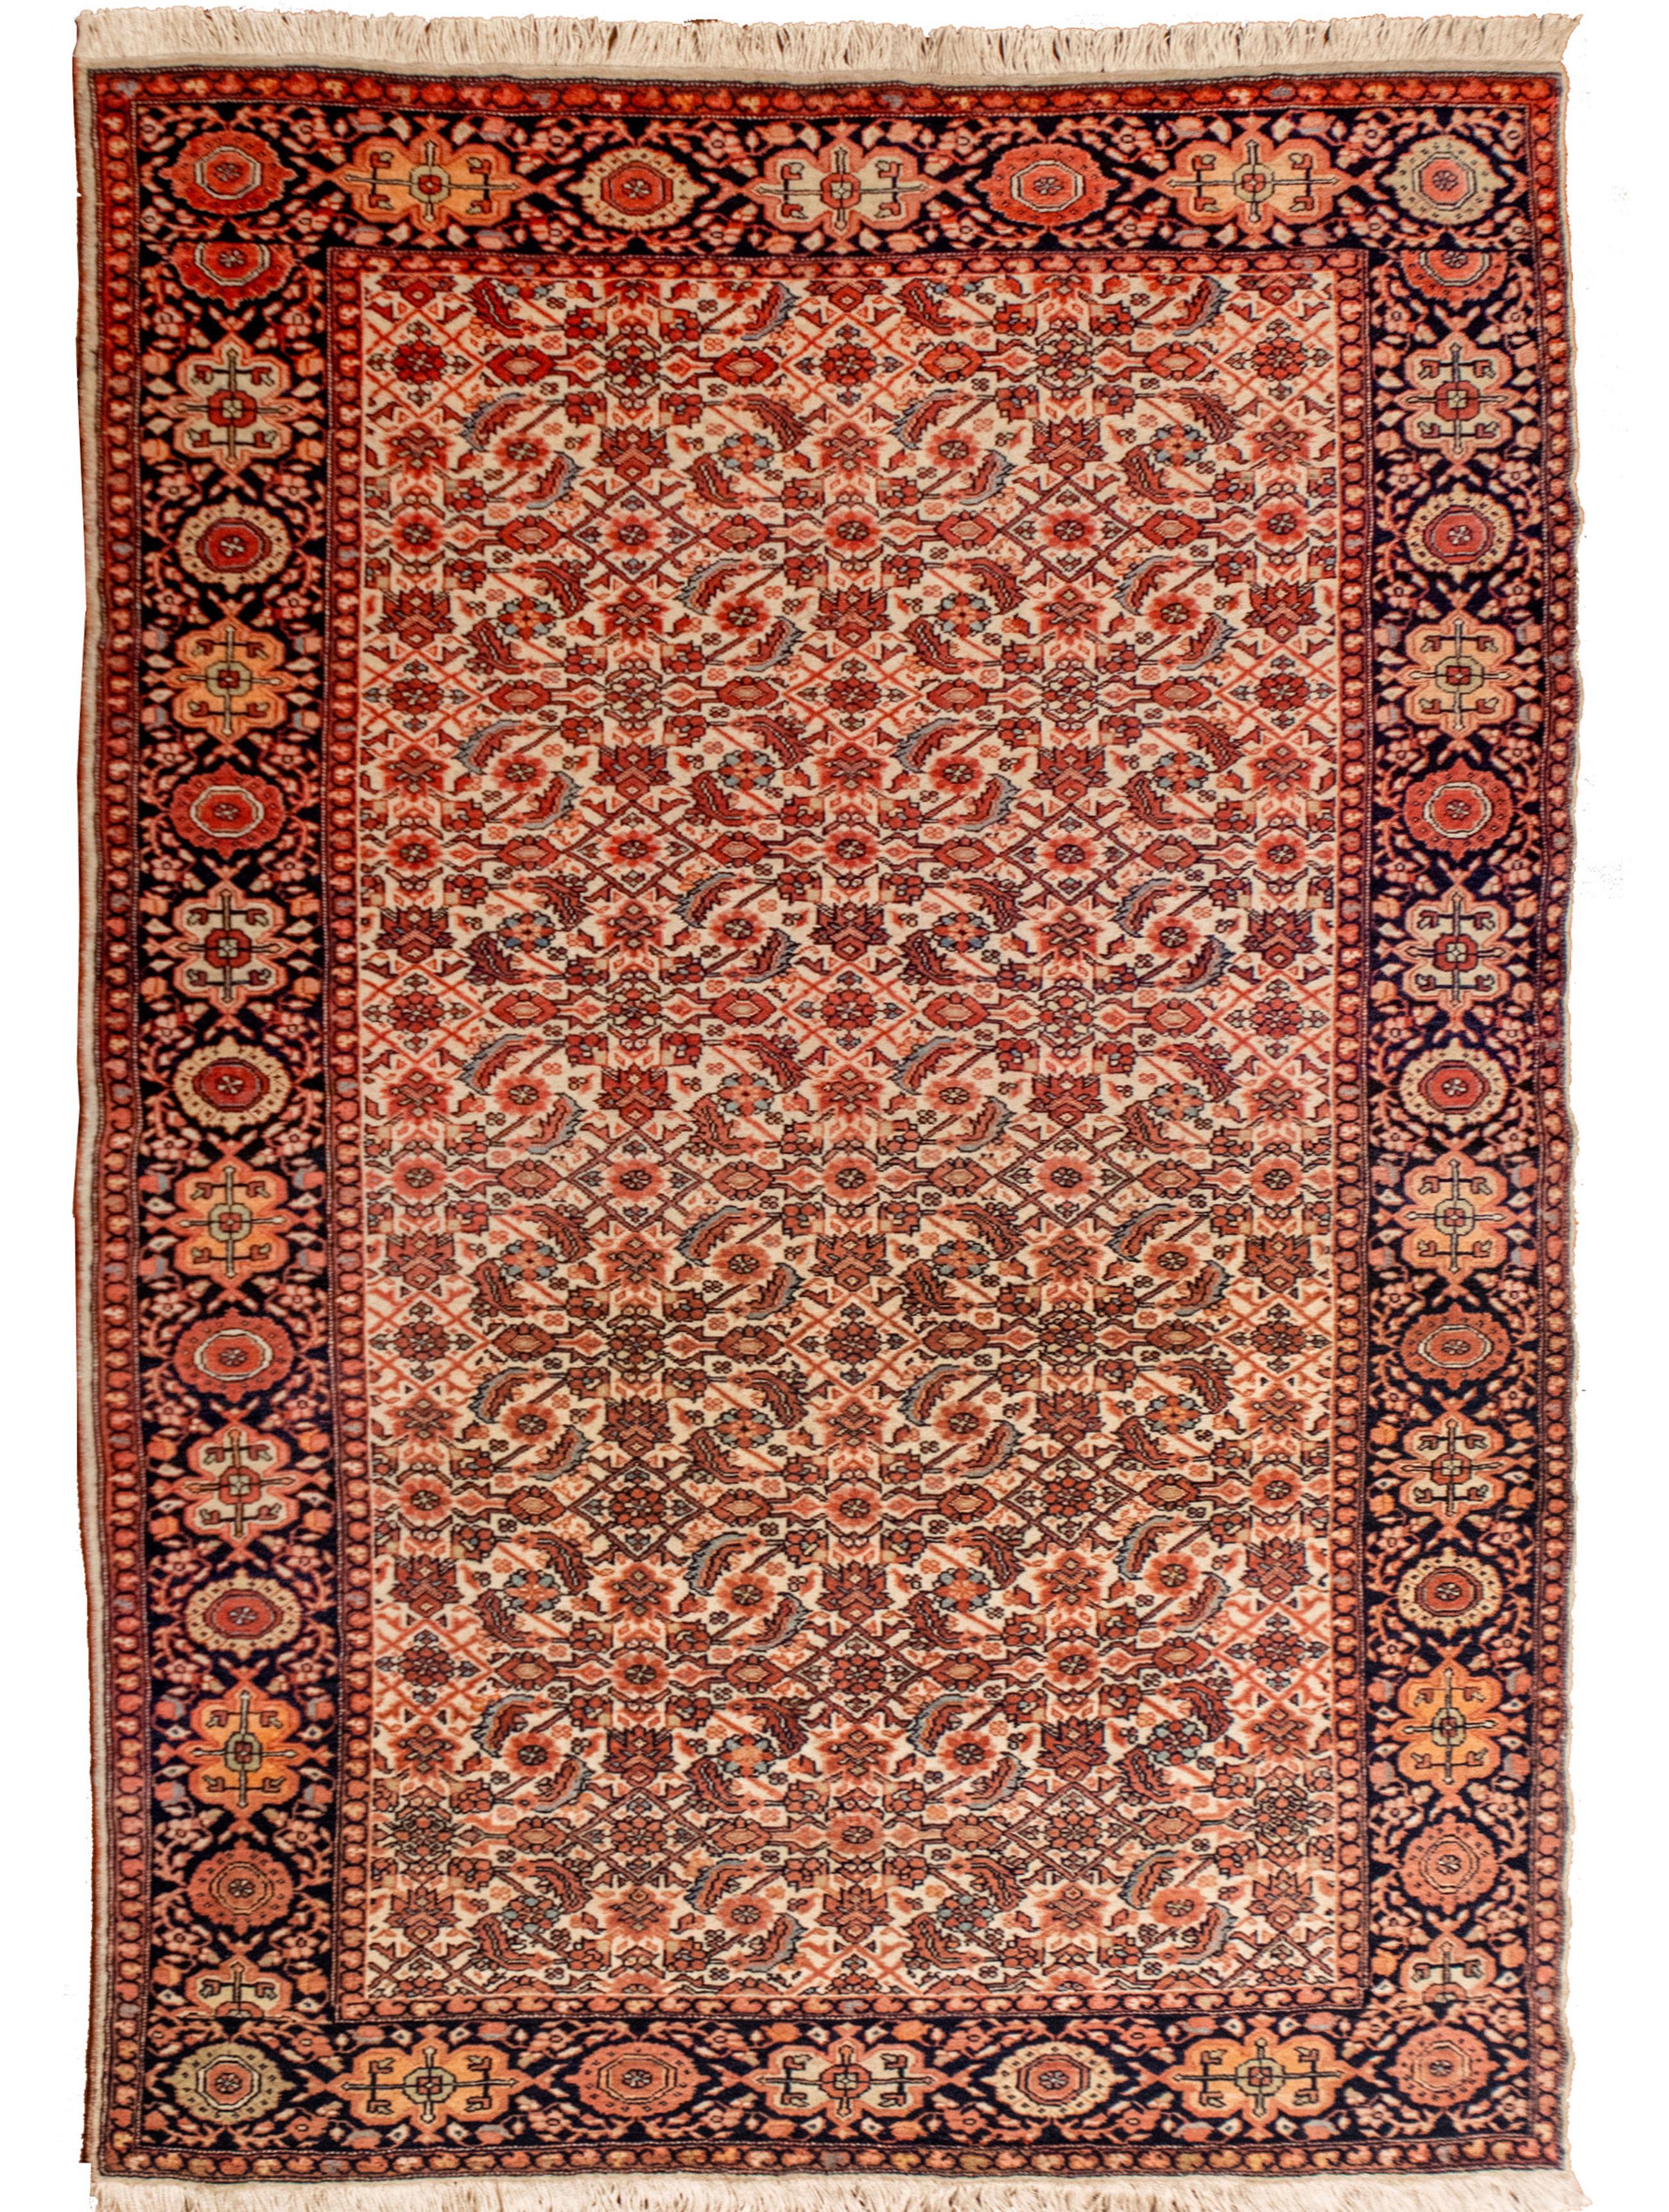 This antique treasure carries the legacy of bygone eras, offering a glimpse into the rich world of Persian rug making. With dimensions of 3'11